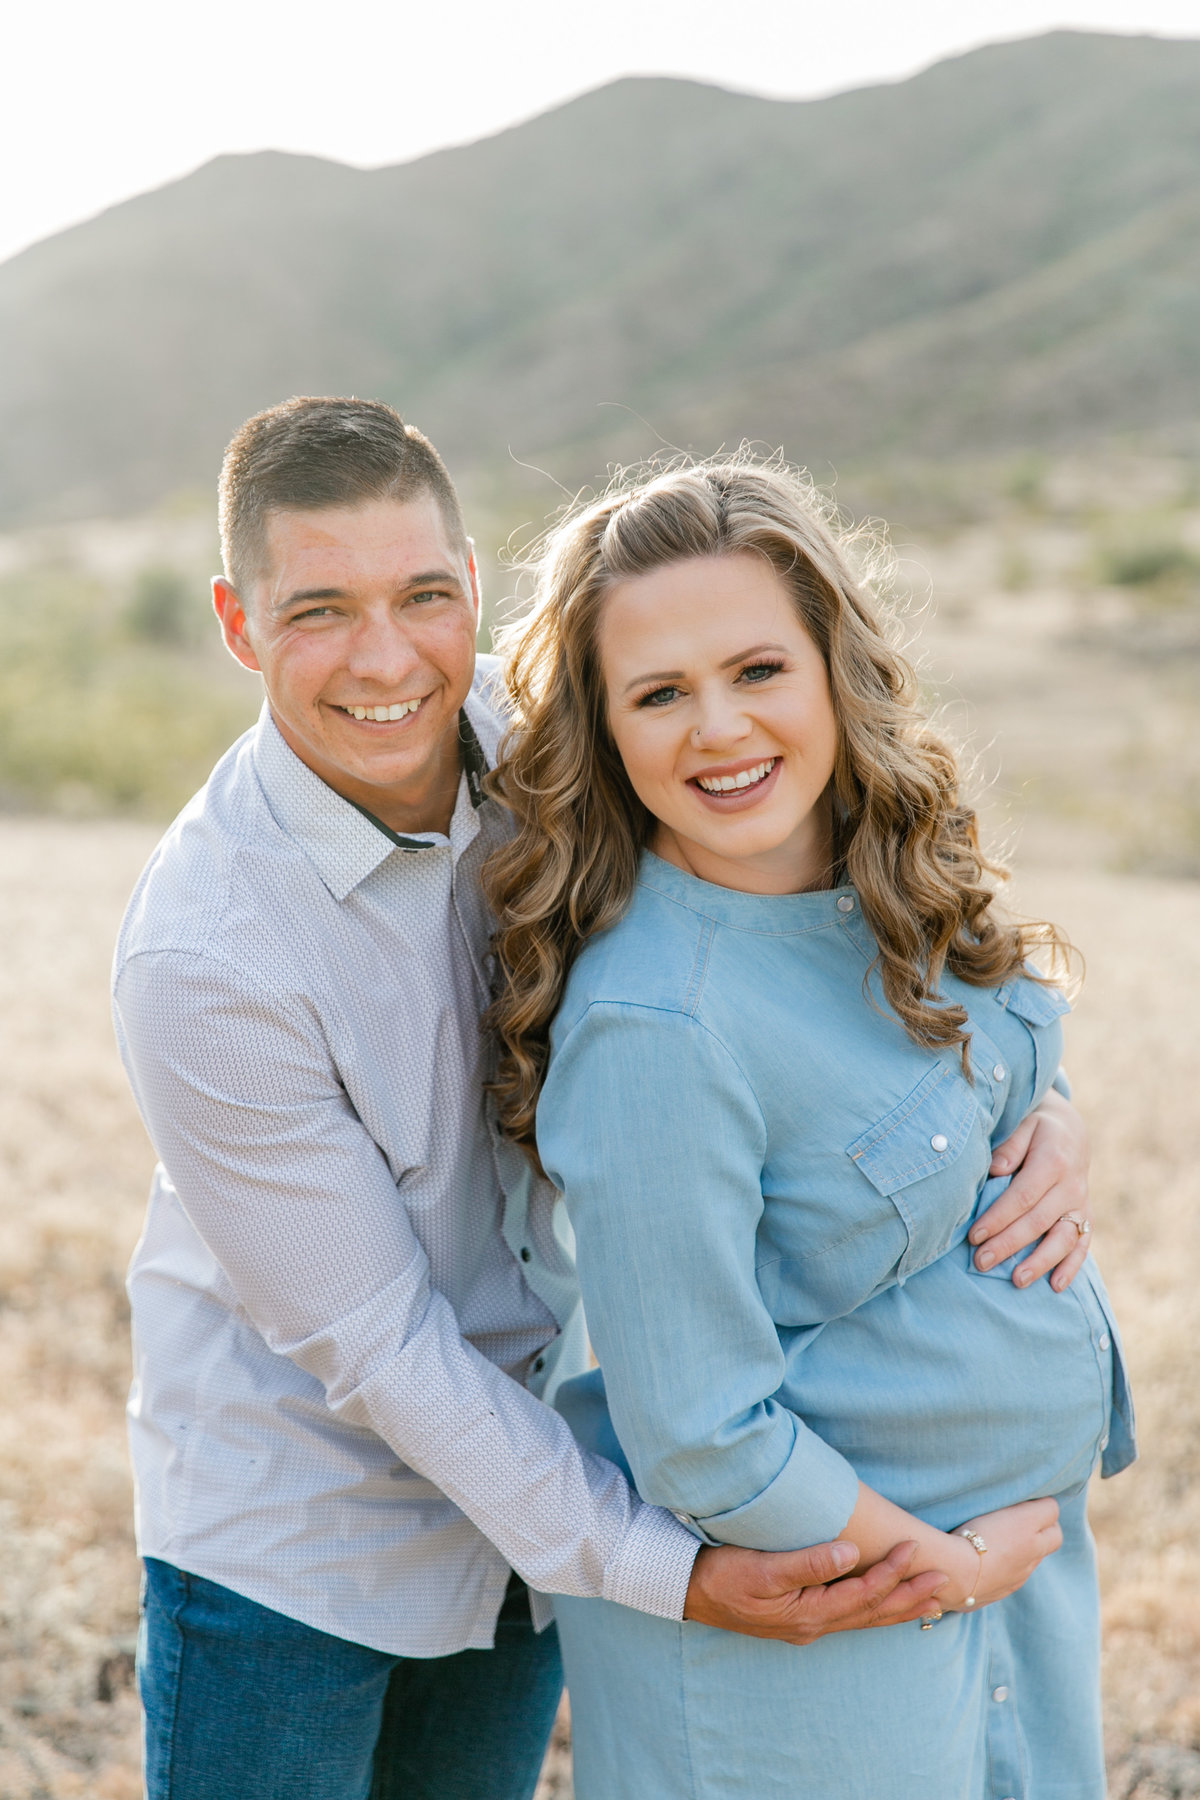 Karlie Colleen Photography - Arizona Maternity Photography - Brittany & Kyle-88